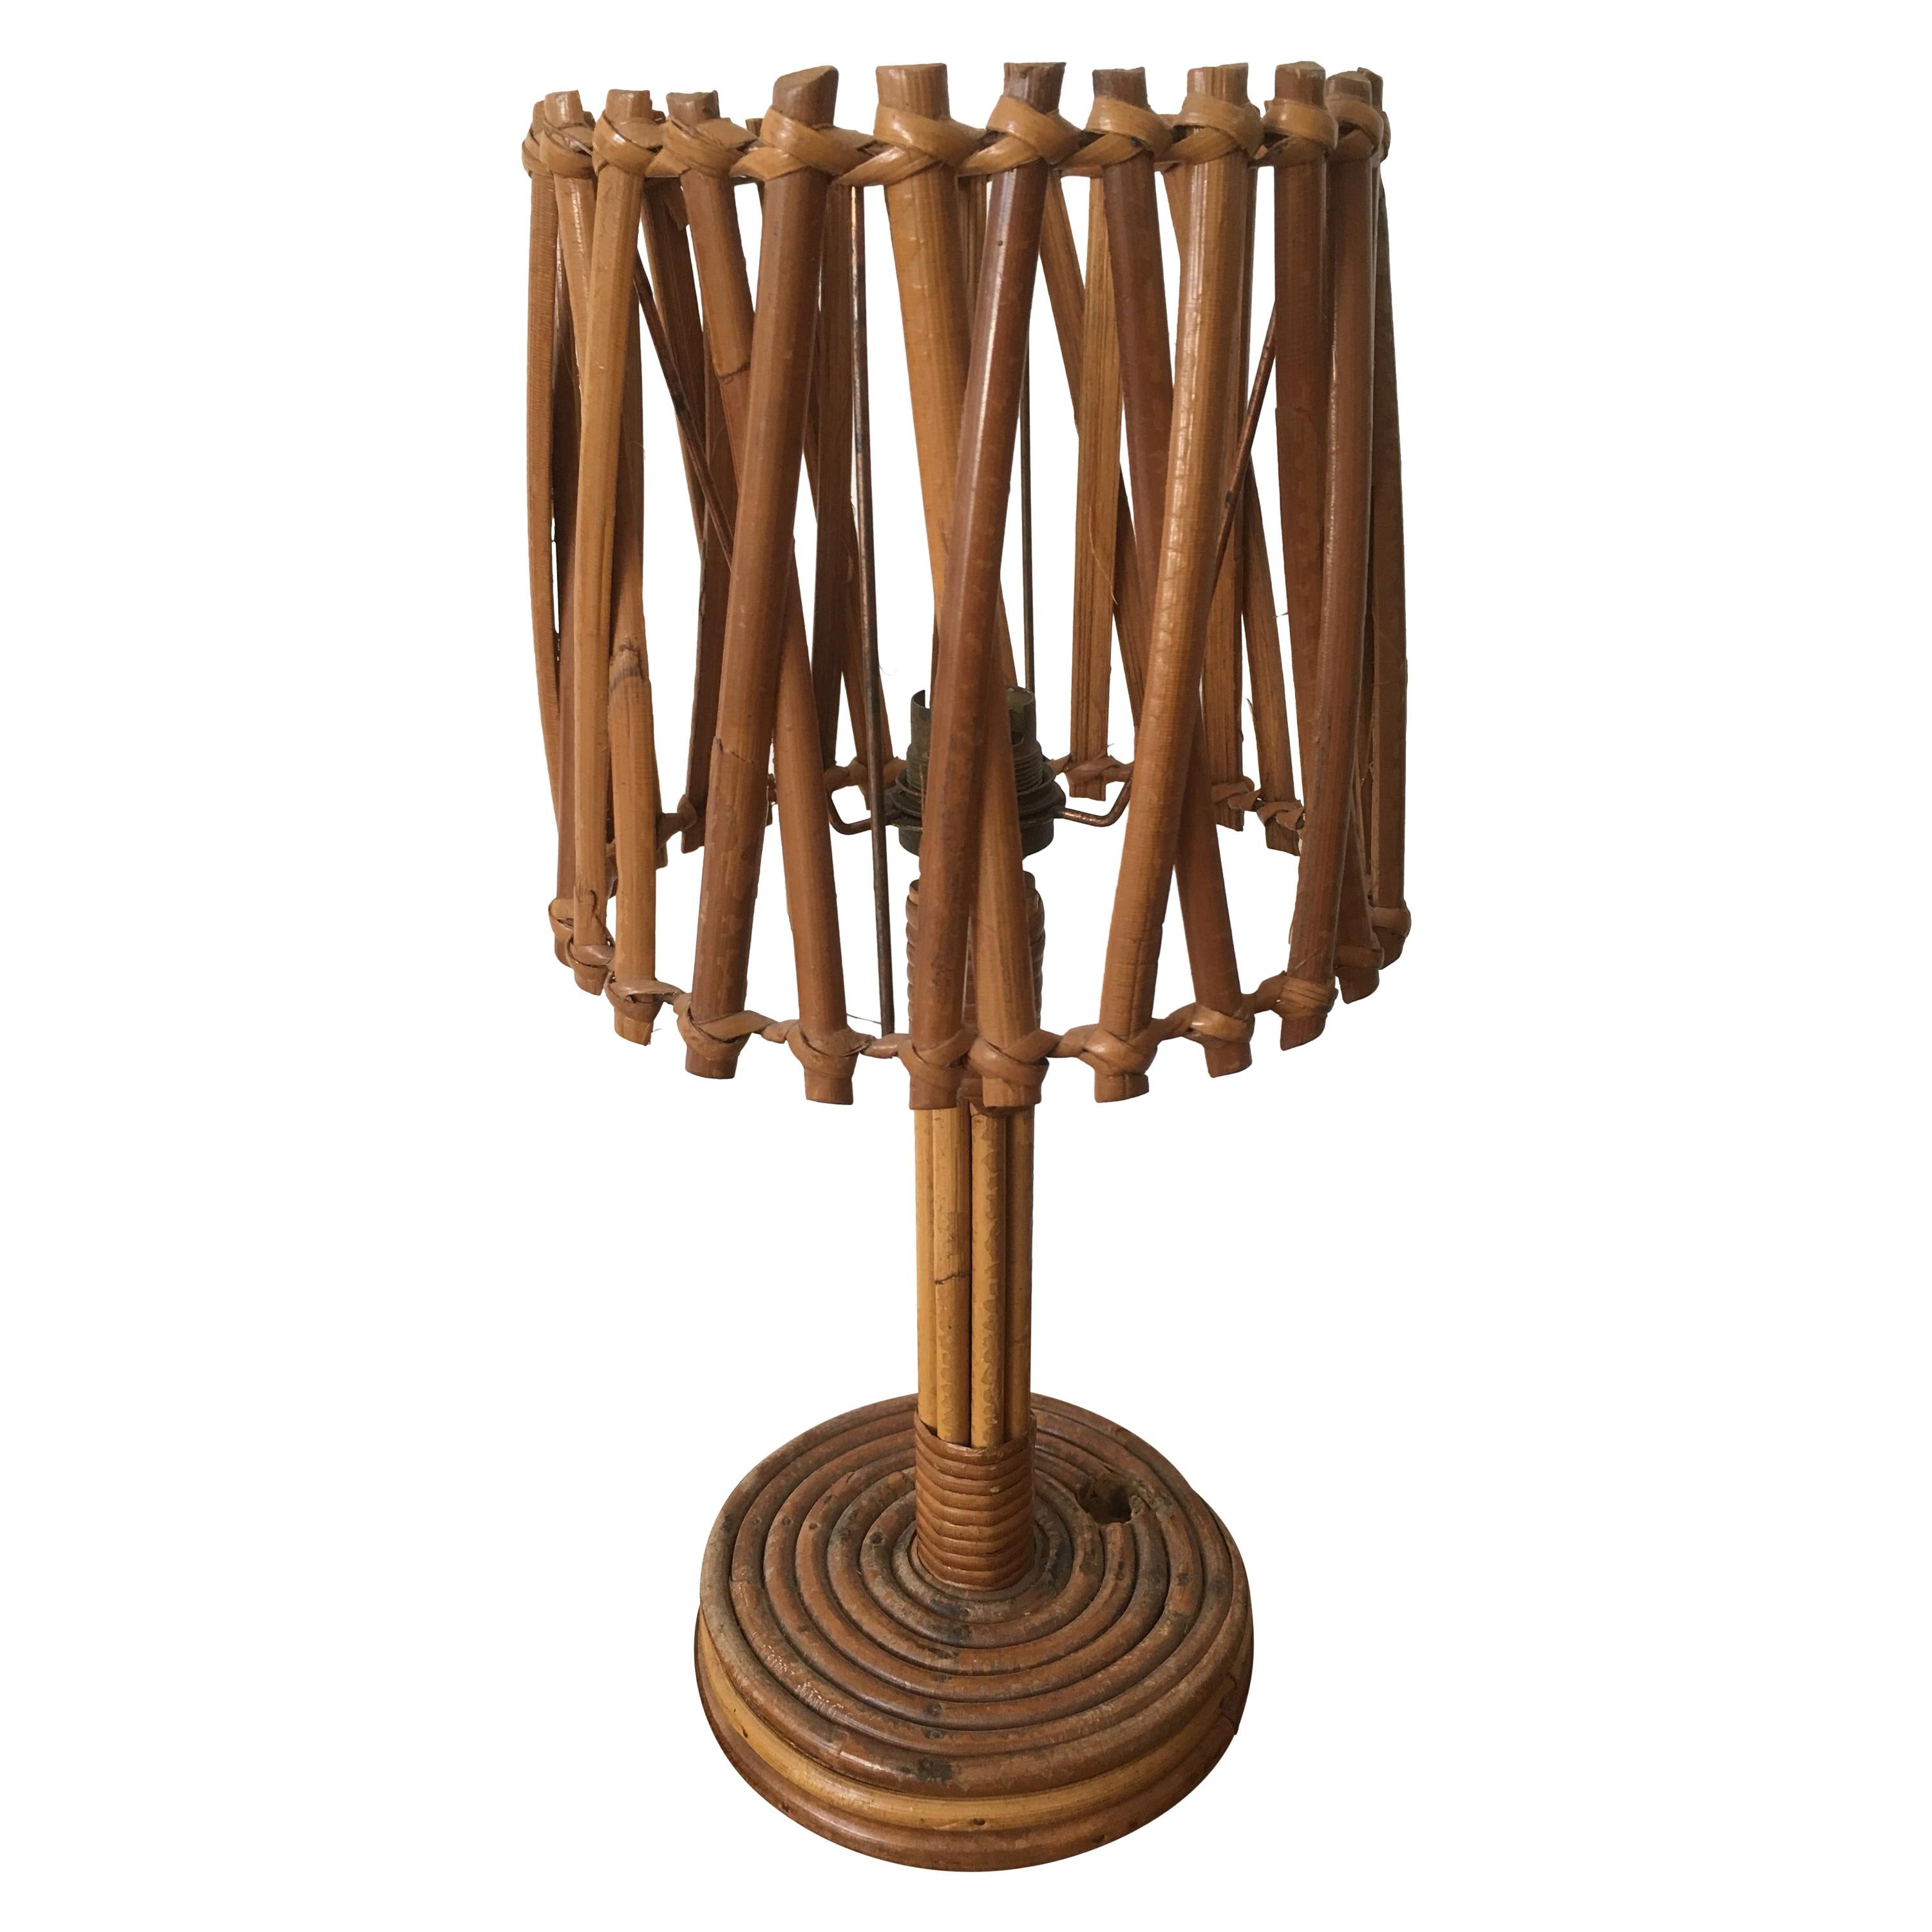 Louis Sognot Rattan Table Lamp, Original Rattan Lampshade, French, 1950s For Sale